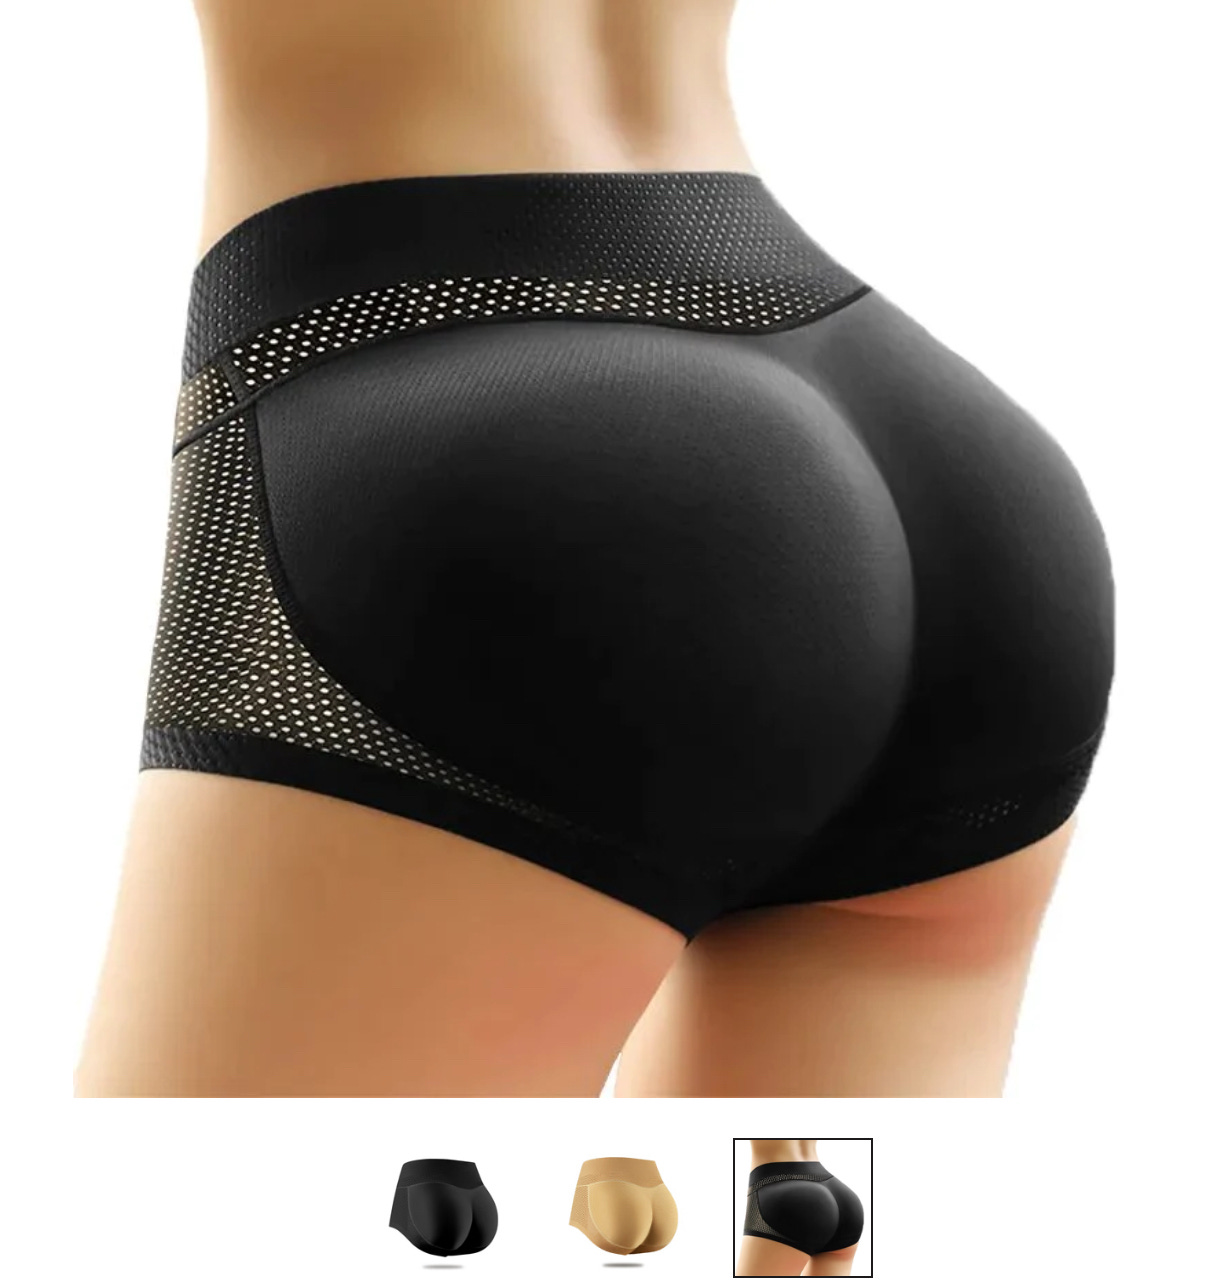 Ad for a butt shaping girdle